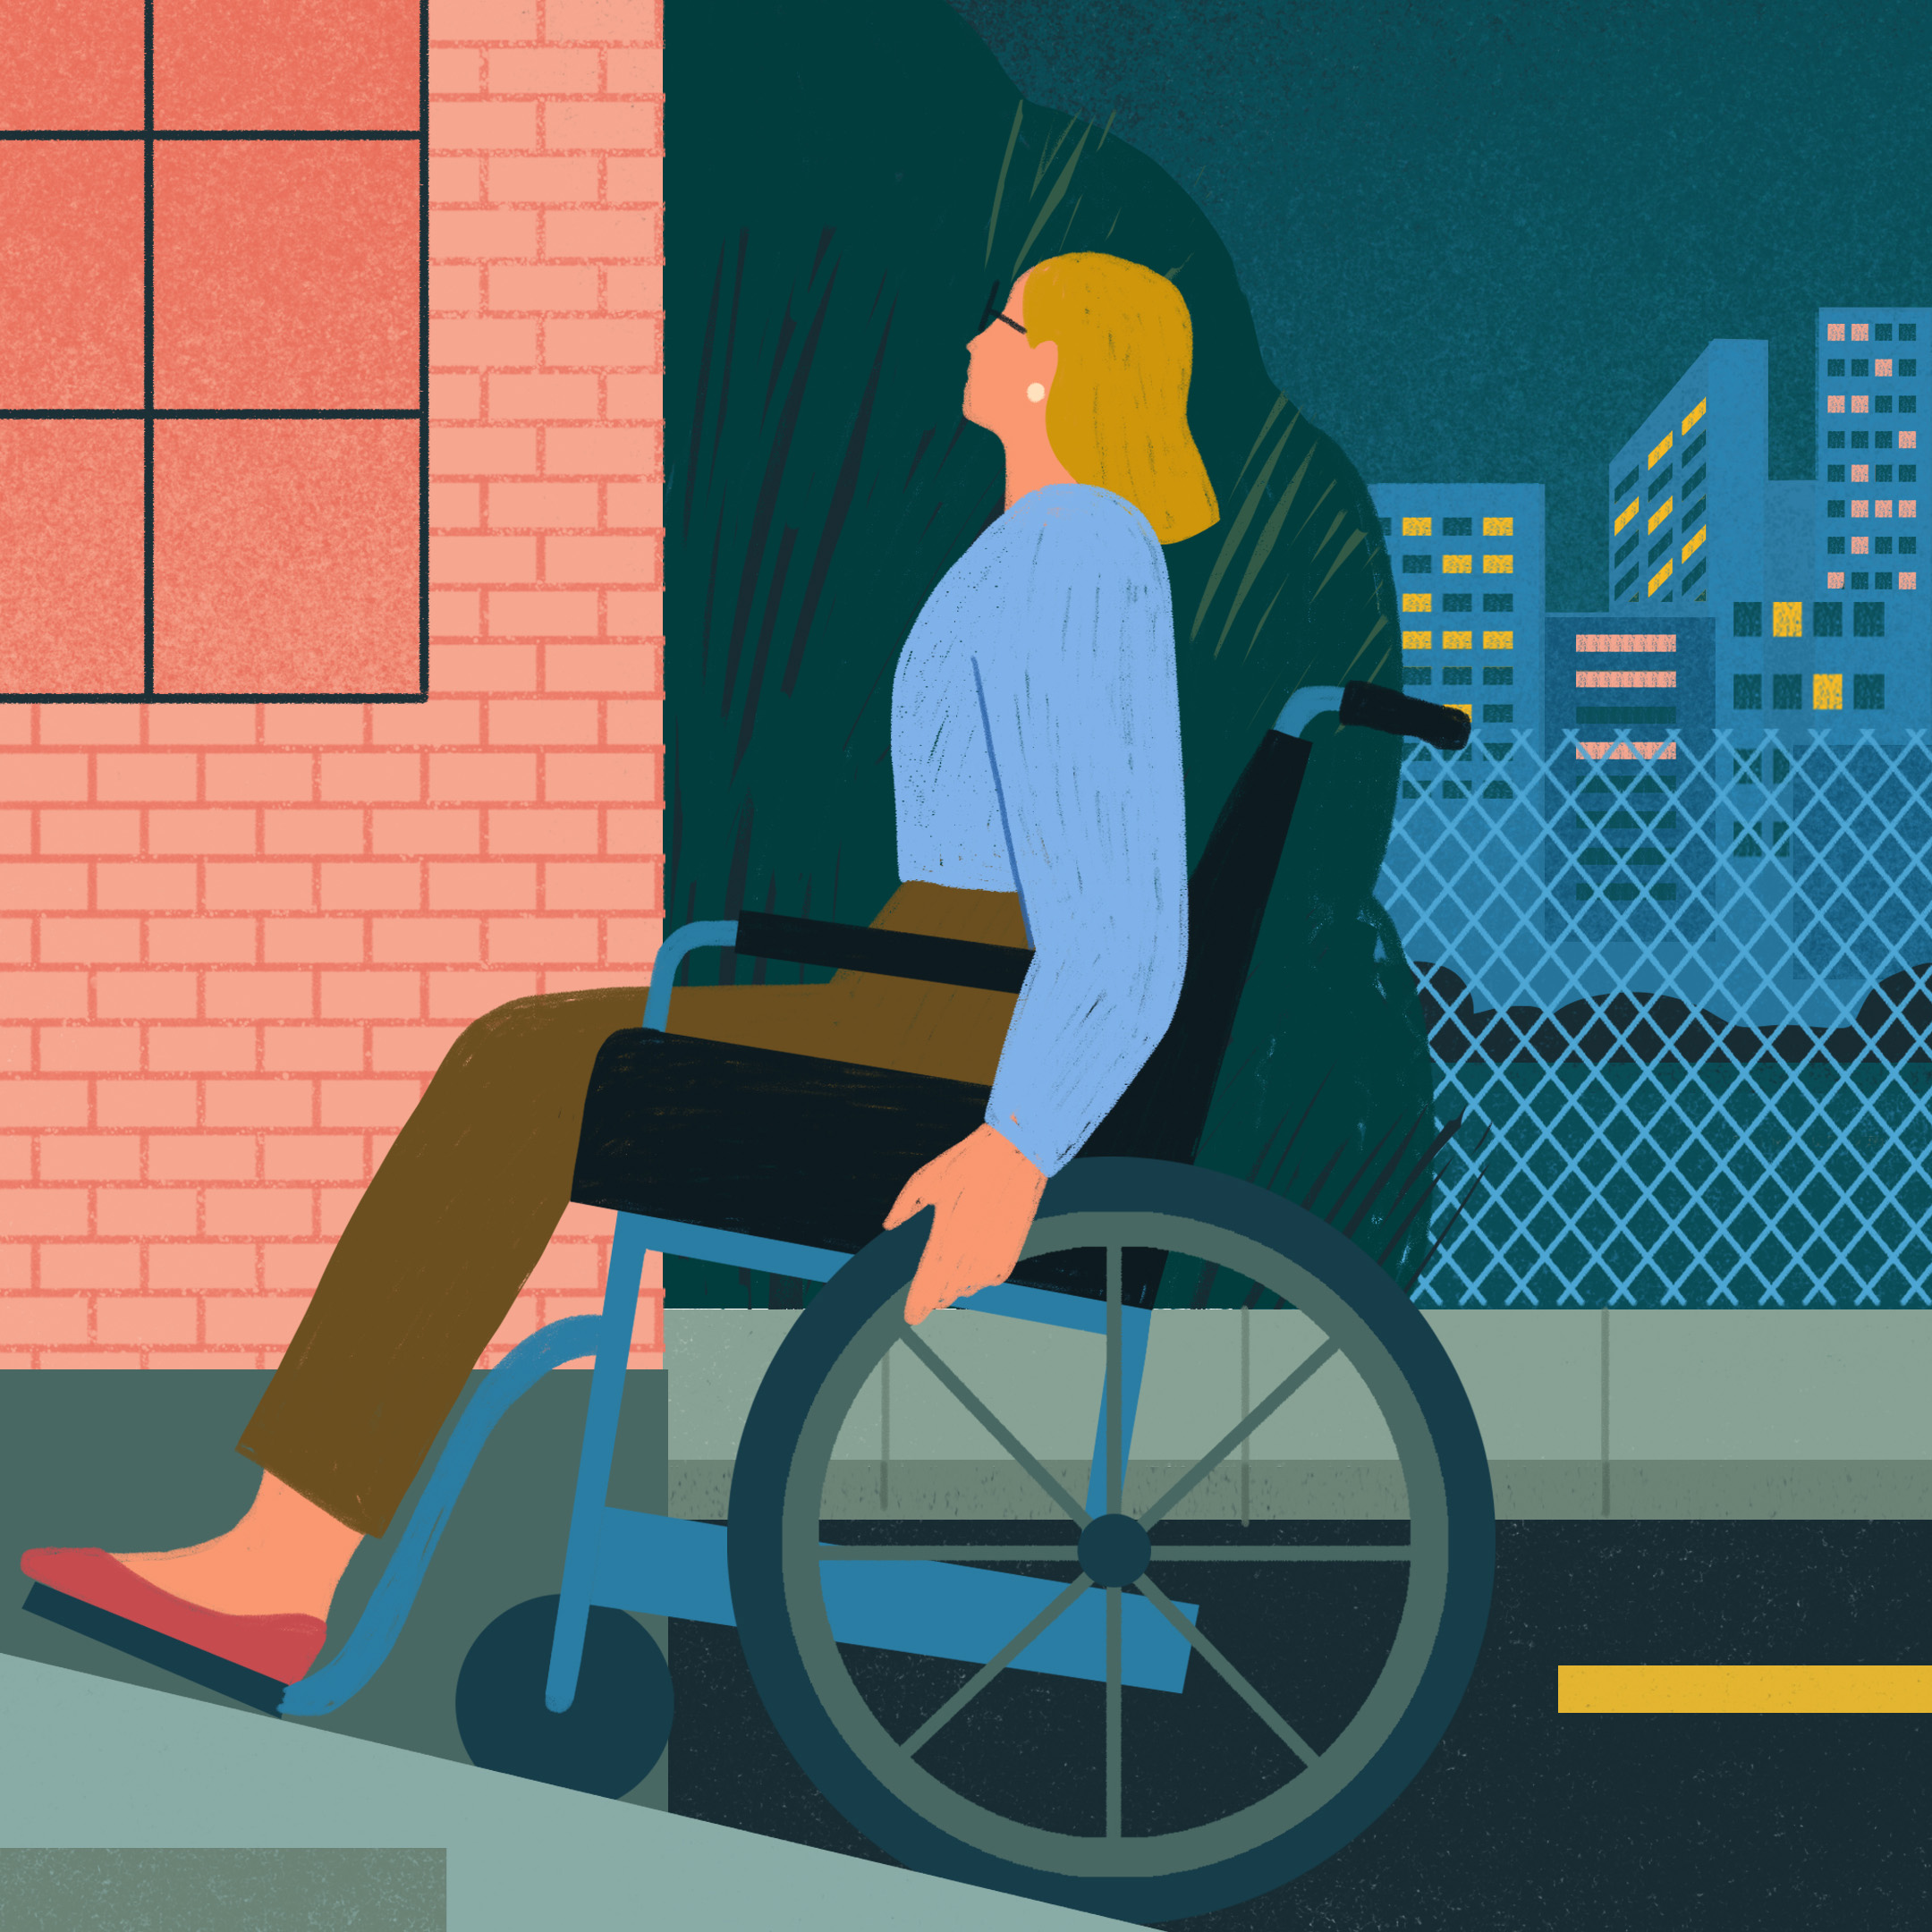 Illustration of a woman in a wheelchair going up a ramp on a street